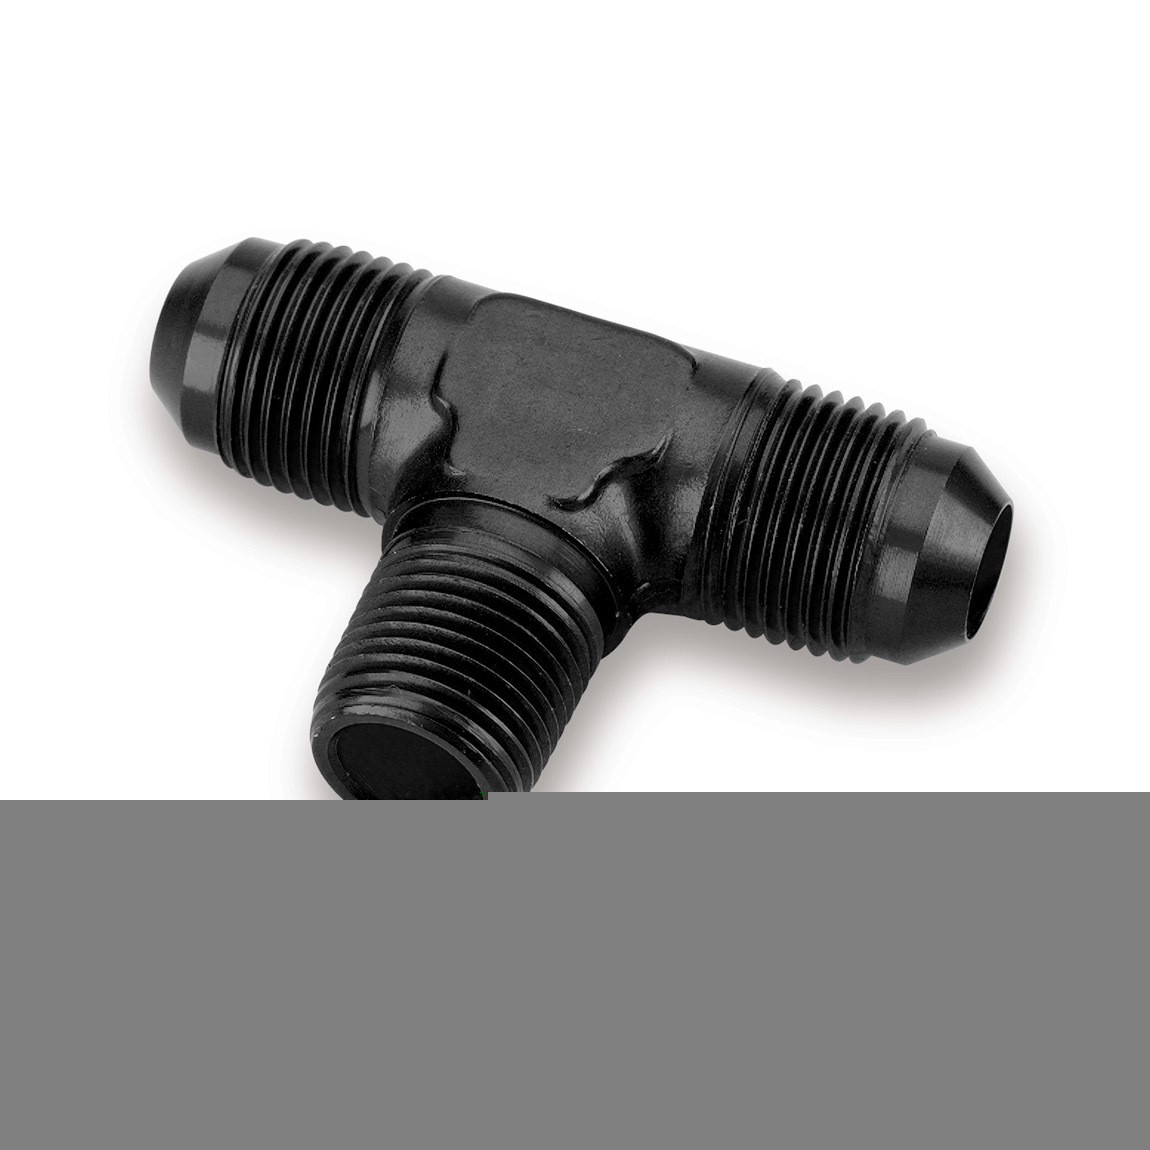 Earls AT982510ERL Fitting, Adapter Tee, 10 AN Male x 10 AN Male x 1/2 in NPT Male, Aluminum, Black Anodized, Each